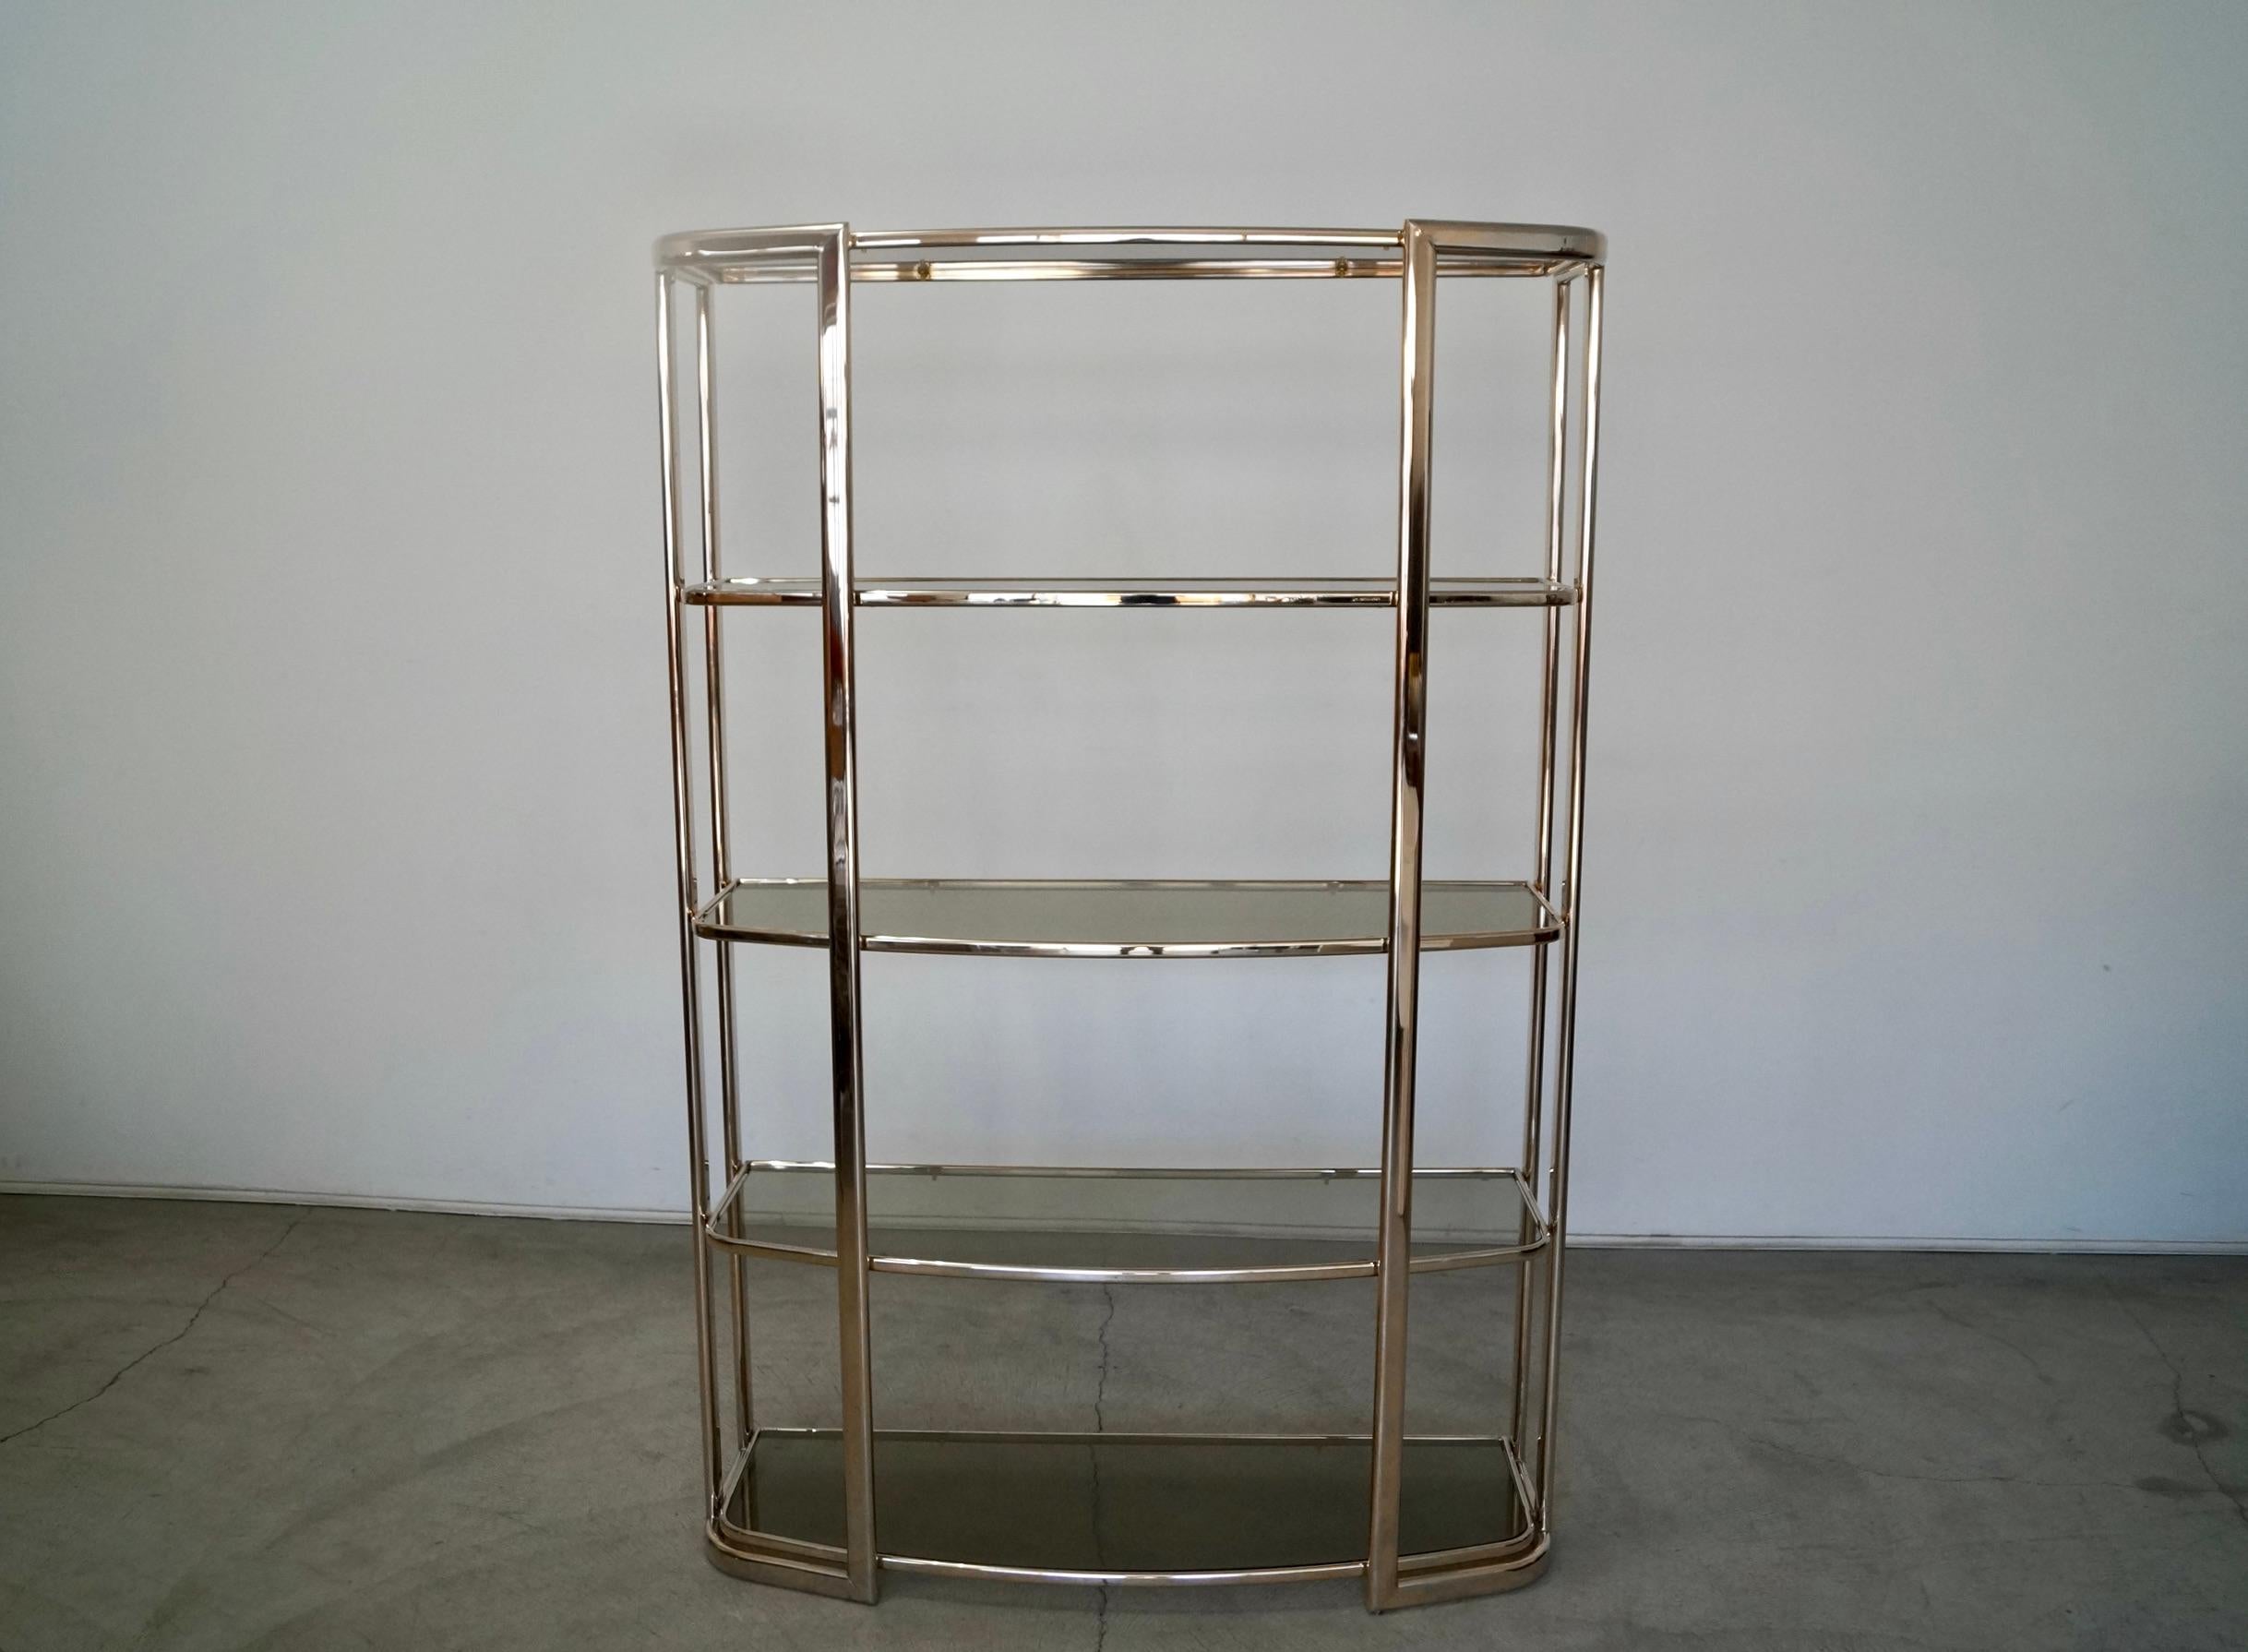 Vintage Mid-Century Modern shelf for sale. Great Art Deco design from the 1970's, and really well made. It has five smoked glass shelves, and is a beautiful etagere or room divider. It's in incredible condition, and is definitely a piece to add to